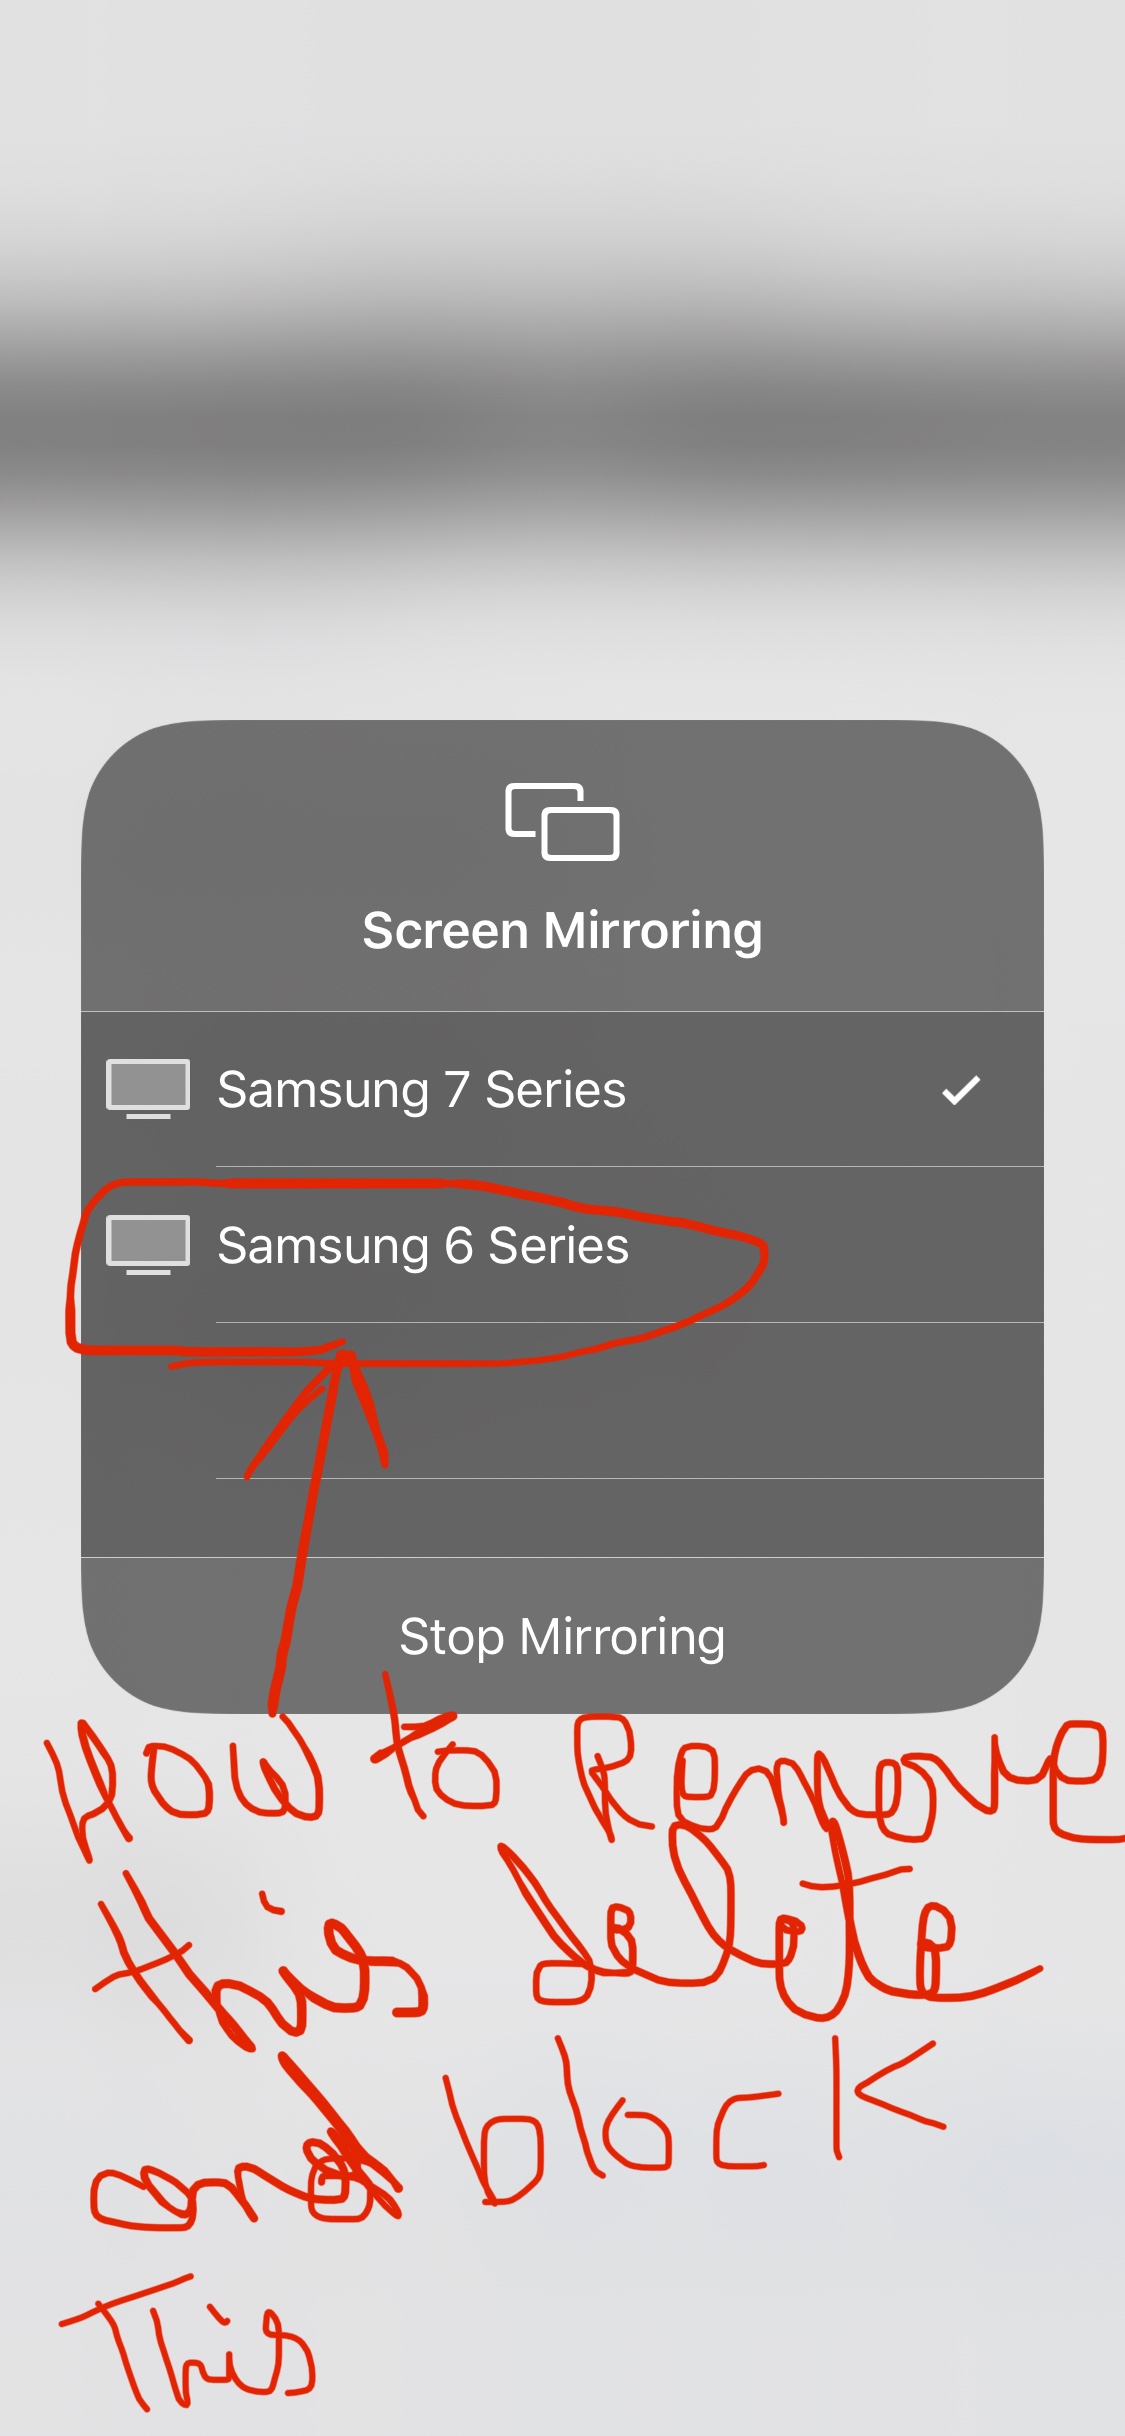 How To Remove Samsung Tv From Iphone, How To Remove Screen Mirroring Iphone 7